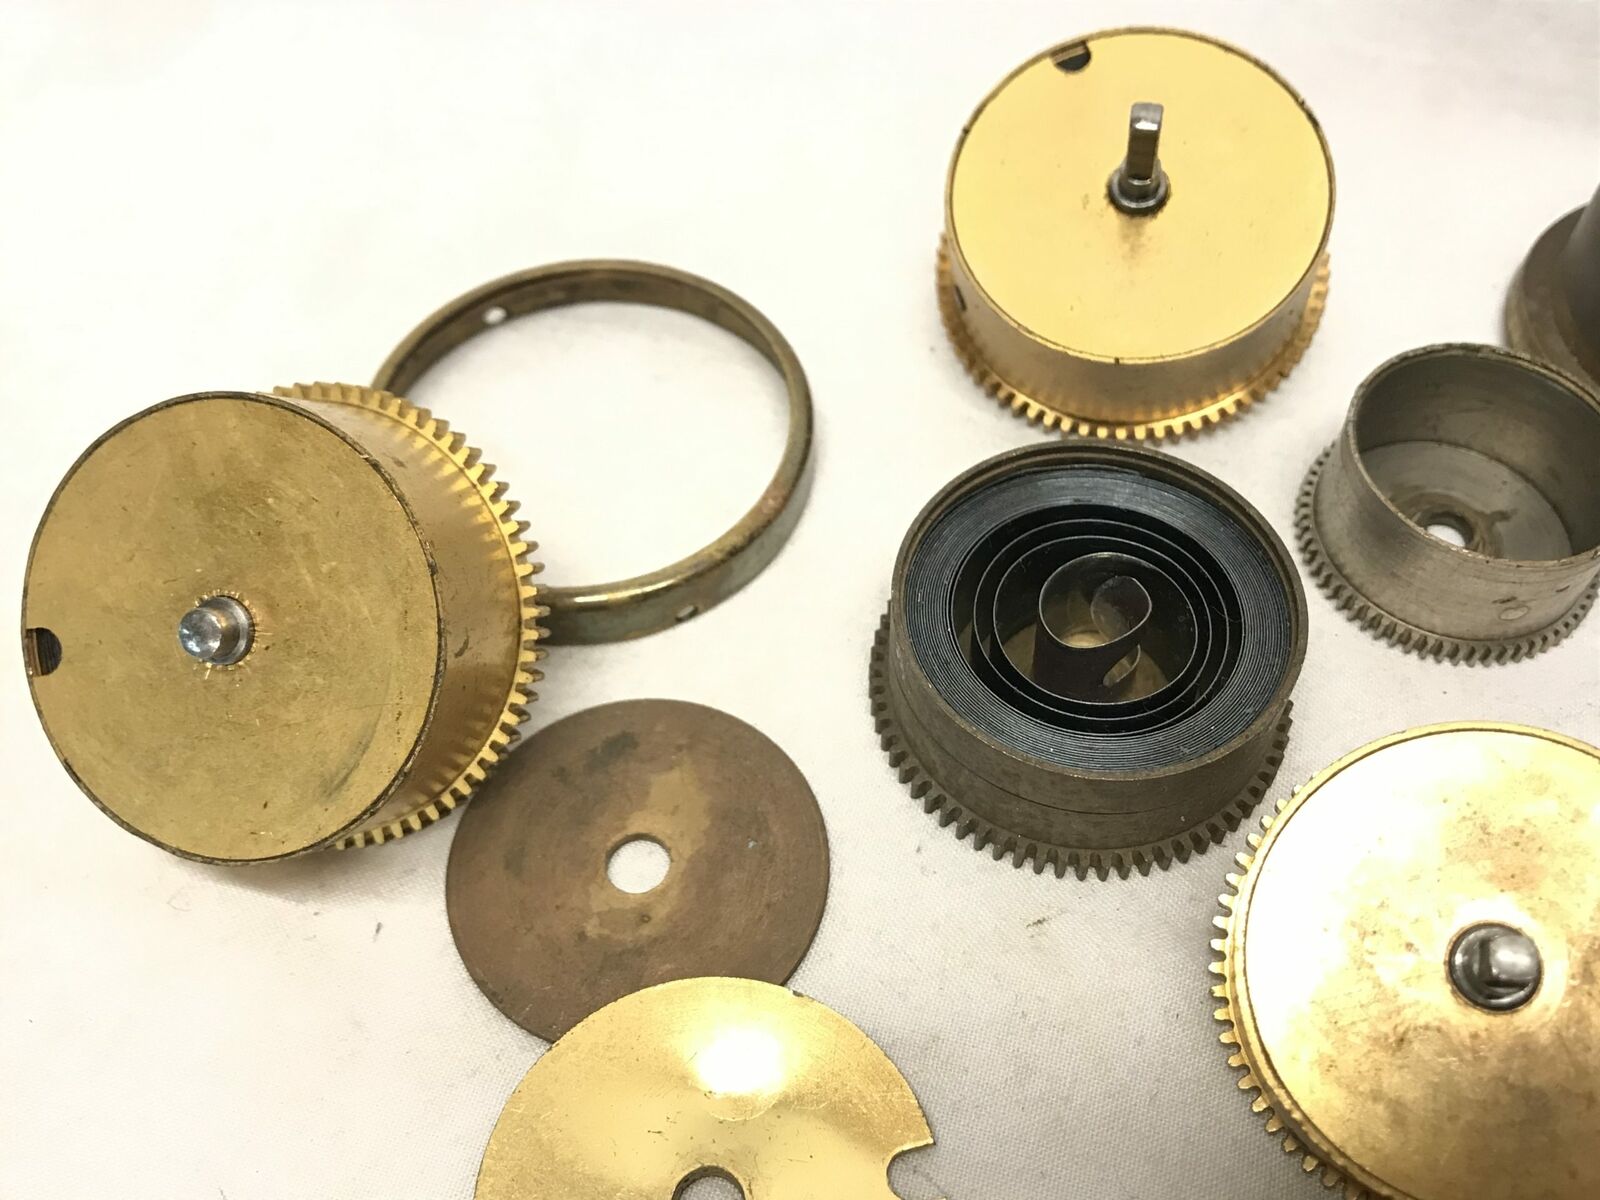 3 Details about   Vintage 1953-54 A C Gilbert LOT OF - CJ 36 TOOTH GEAR 5/16" HUB Brass SM 